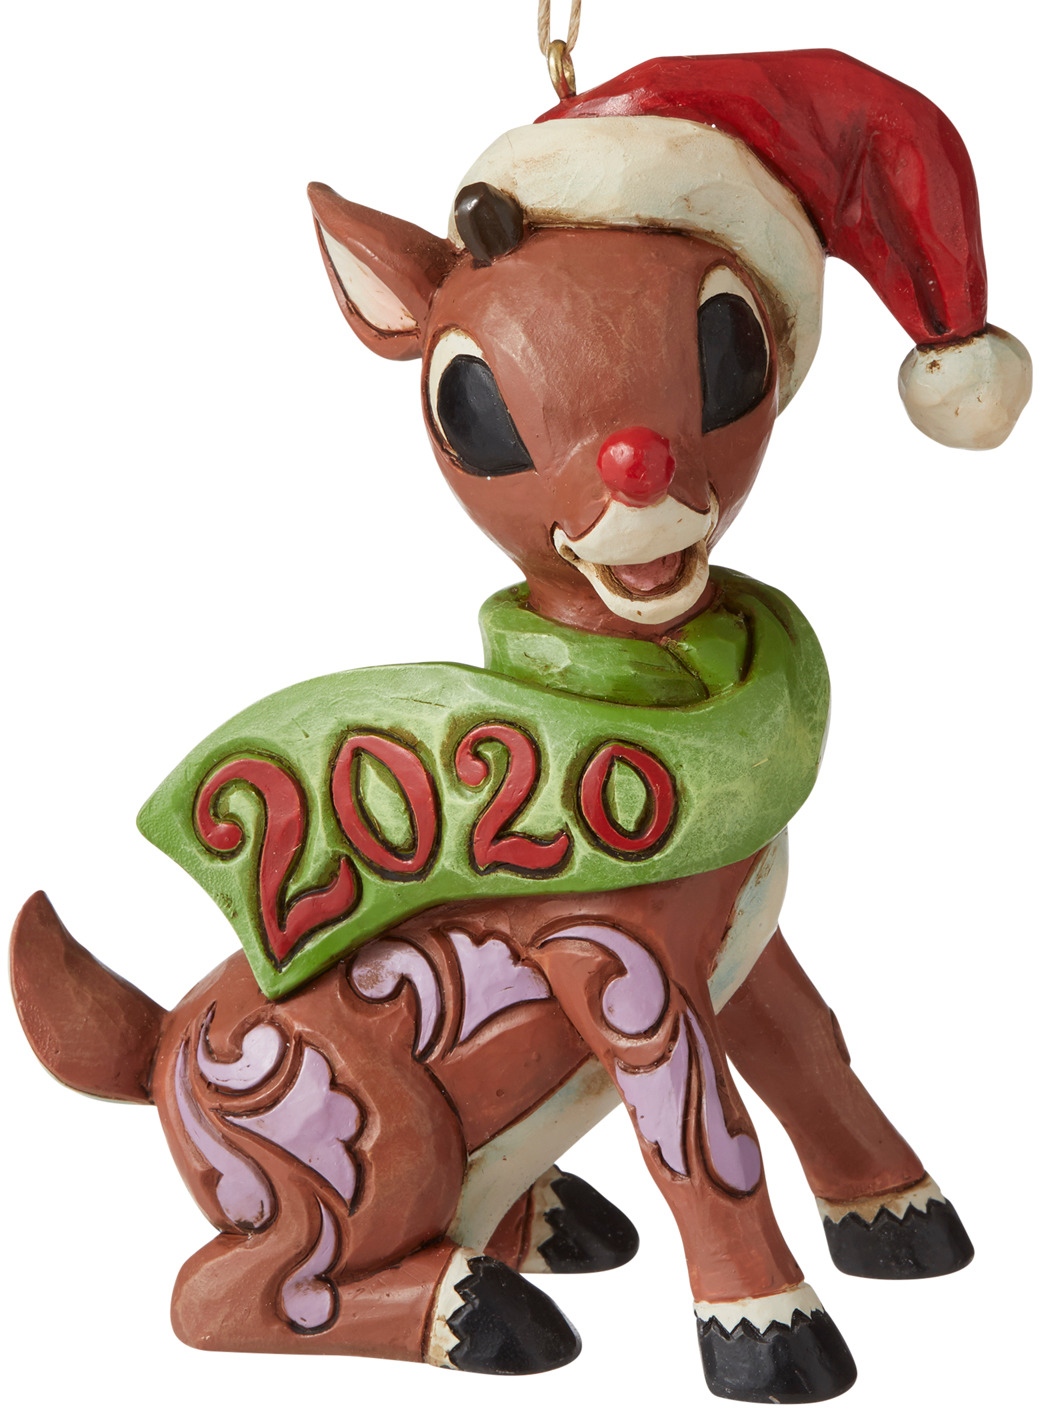 Rudolph Traditions by Jim Shore 6006795 Rudolph 2020 Dated Ornament